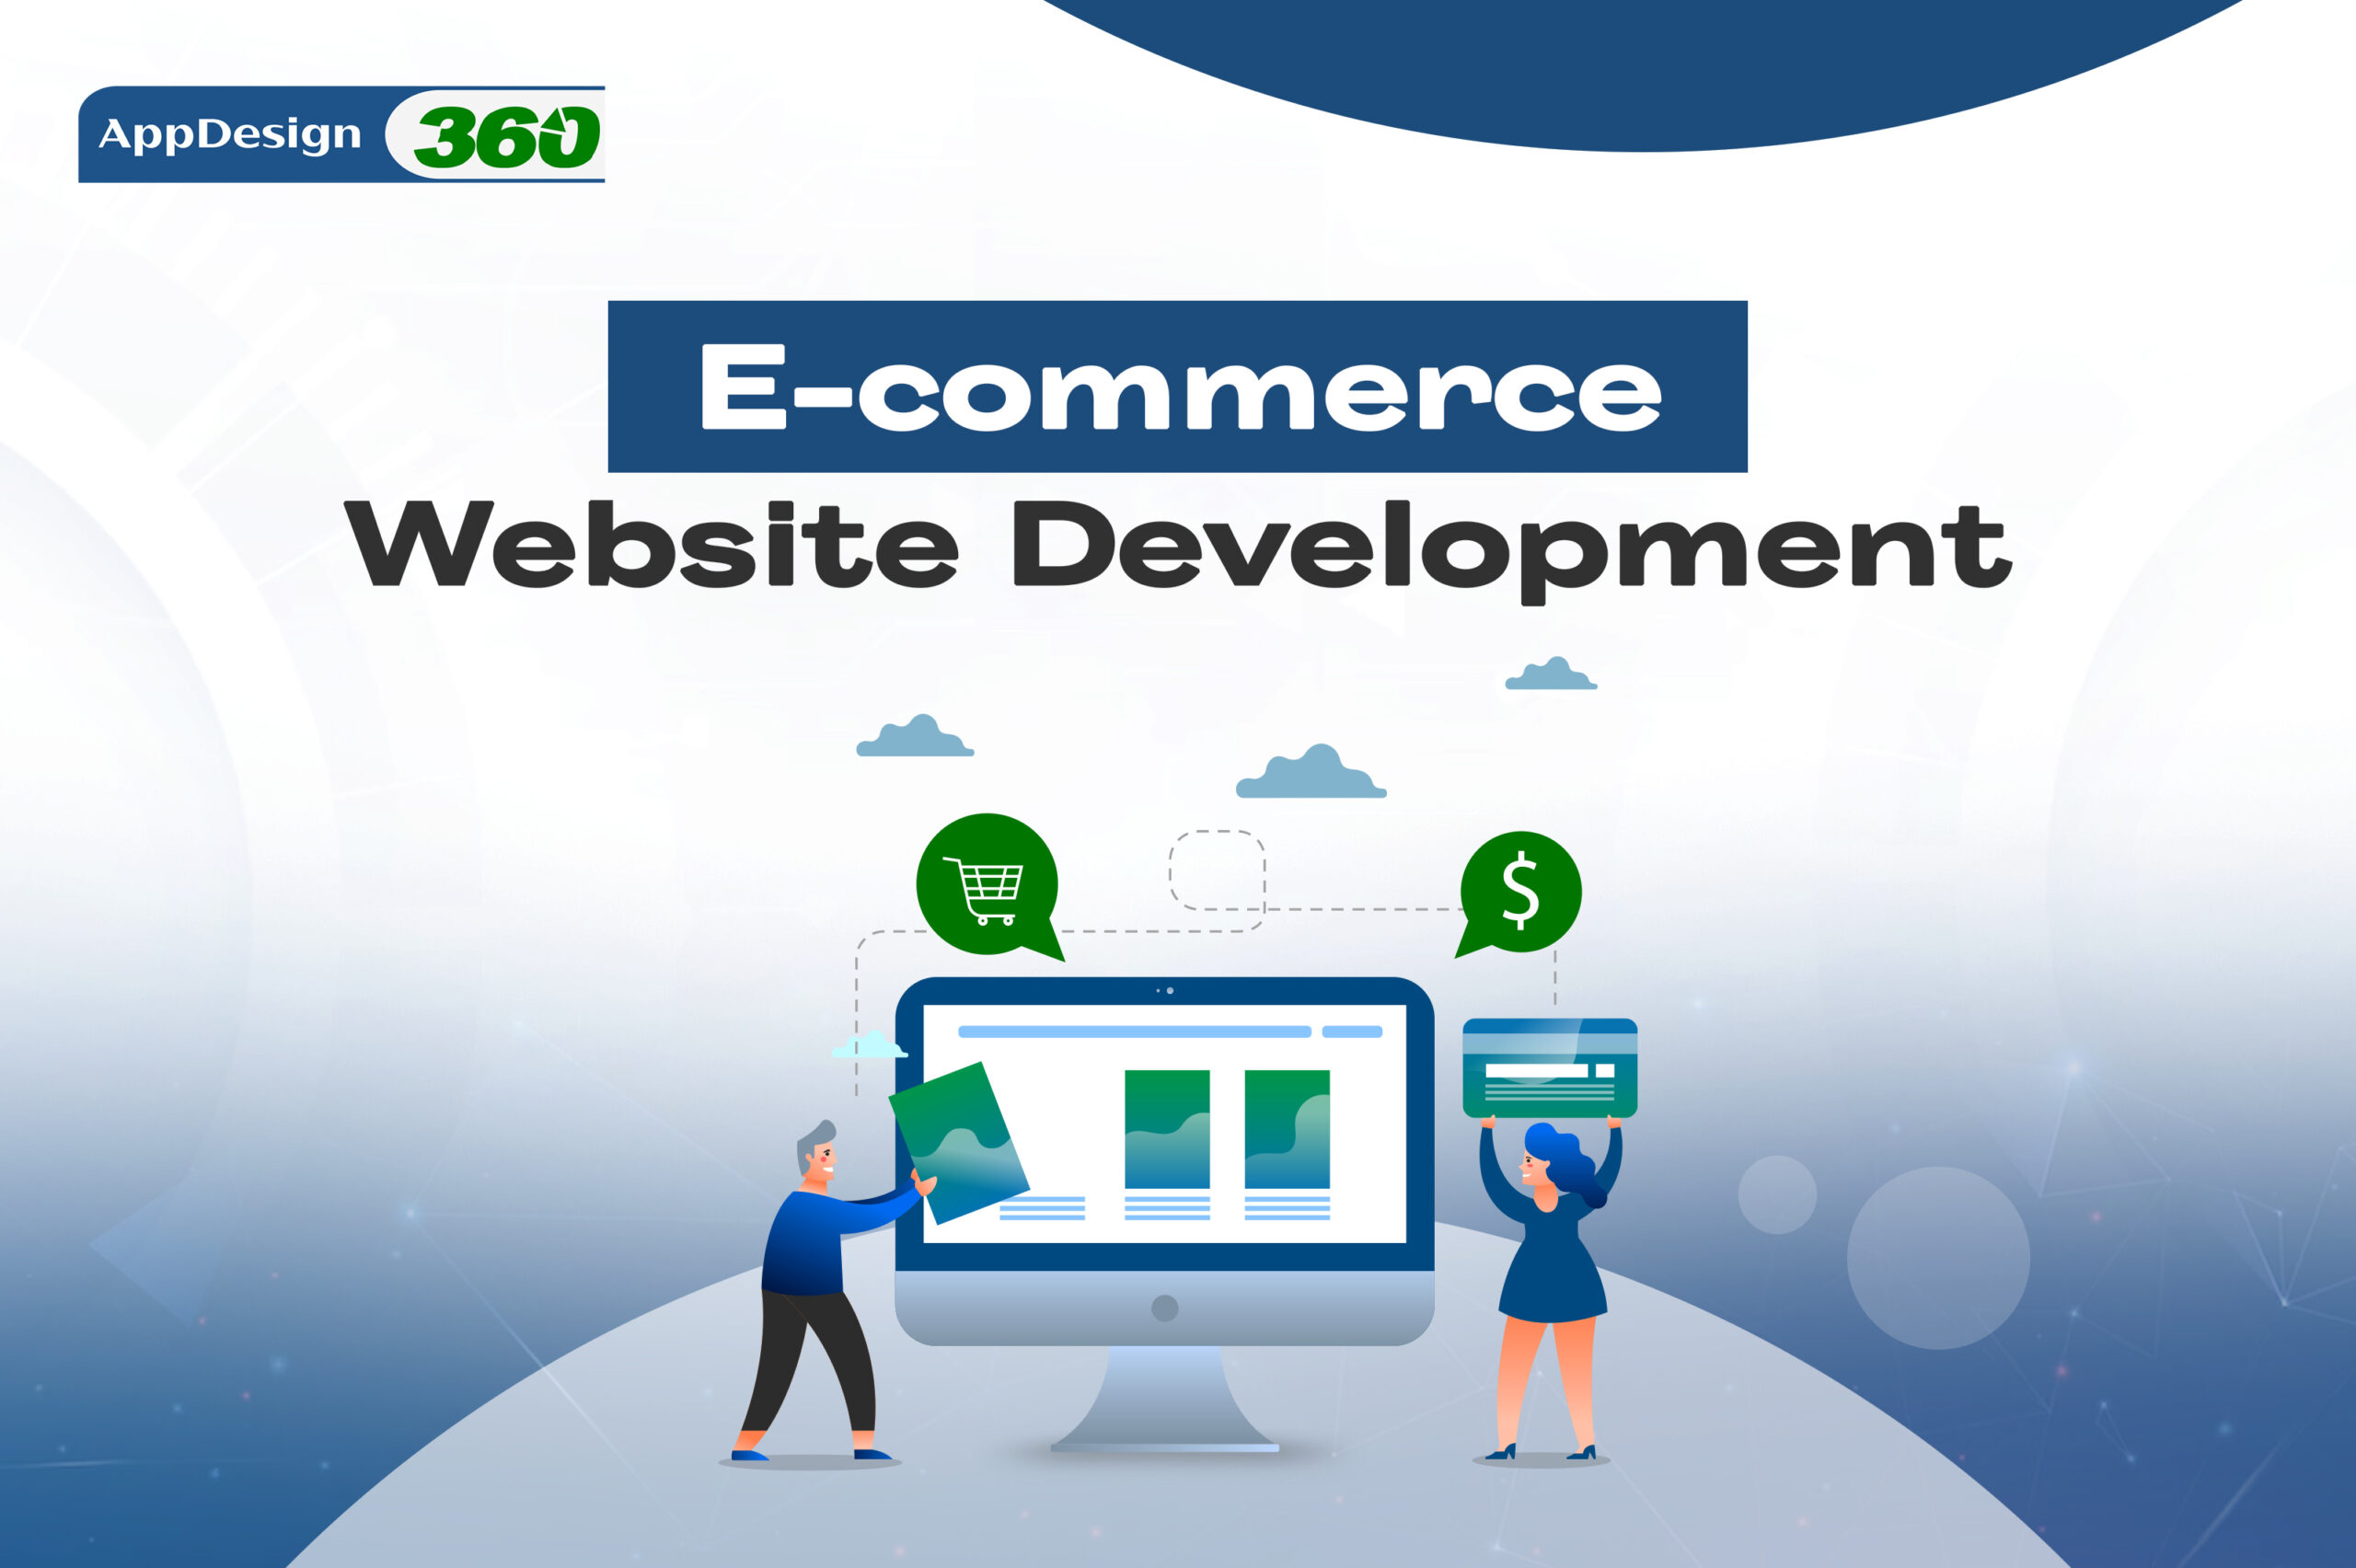 Things to Consider When Designing Your E-commerce Website